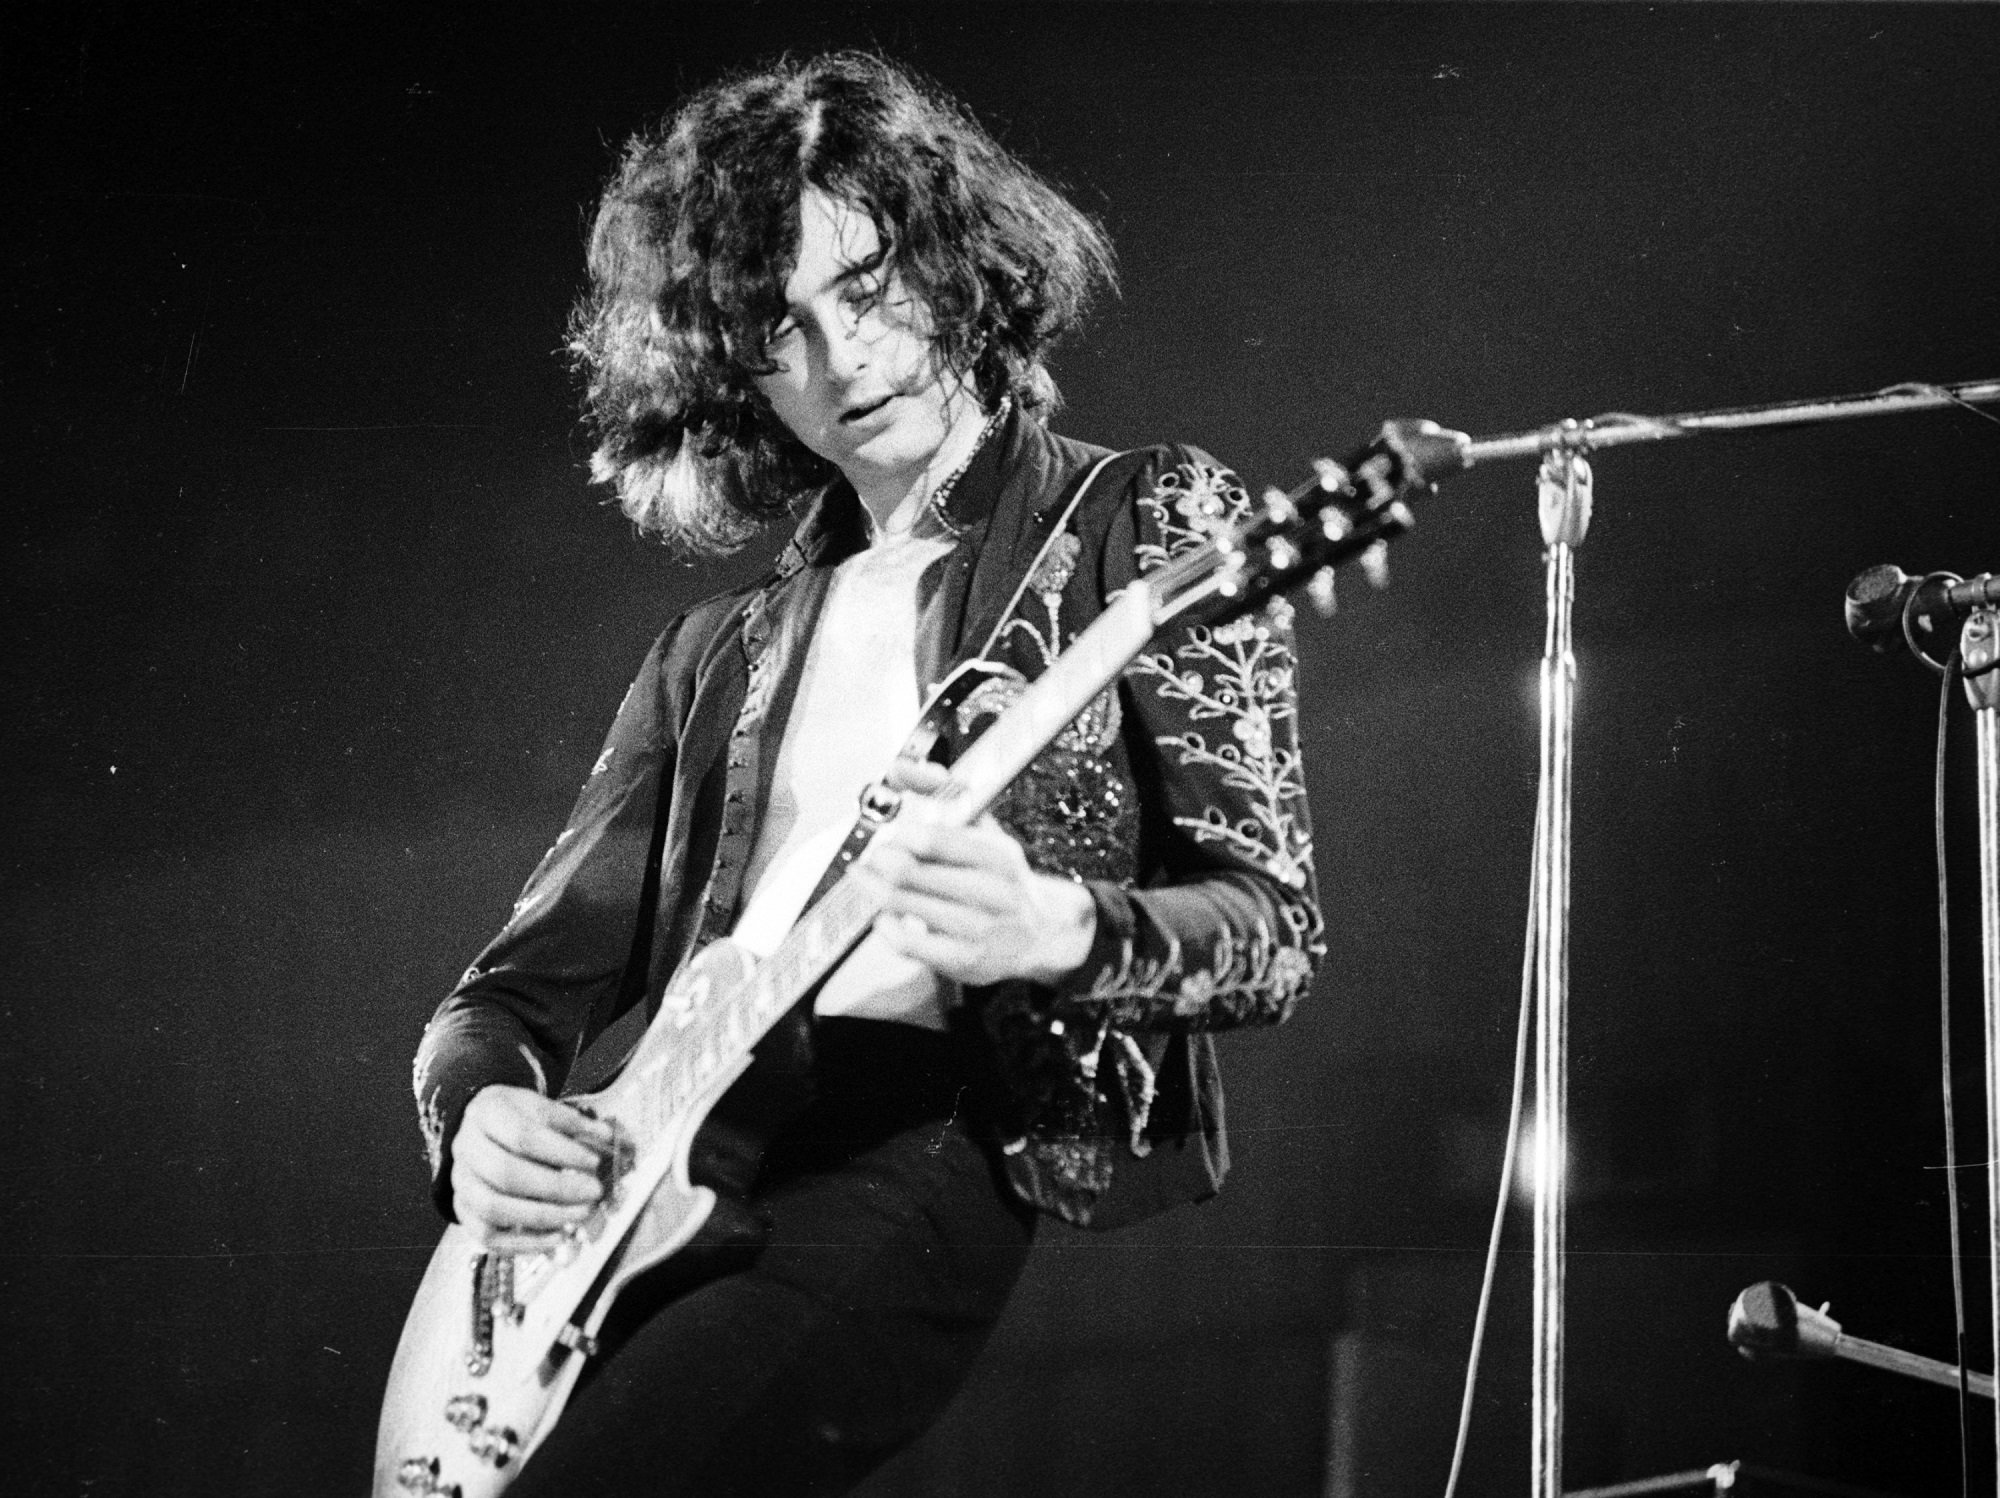 Led Zeppelin's Jimmy Page Found an Abandoned Guitar as Child and It Changed Life